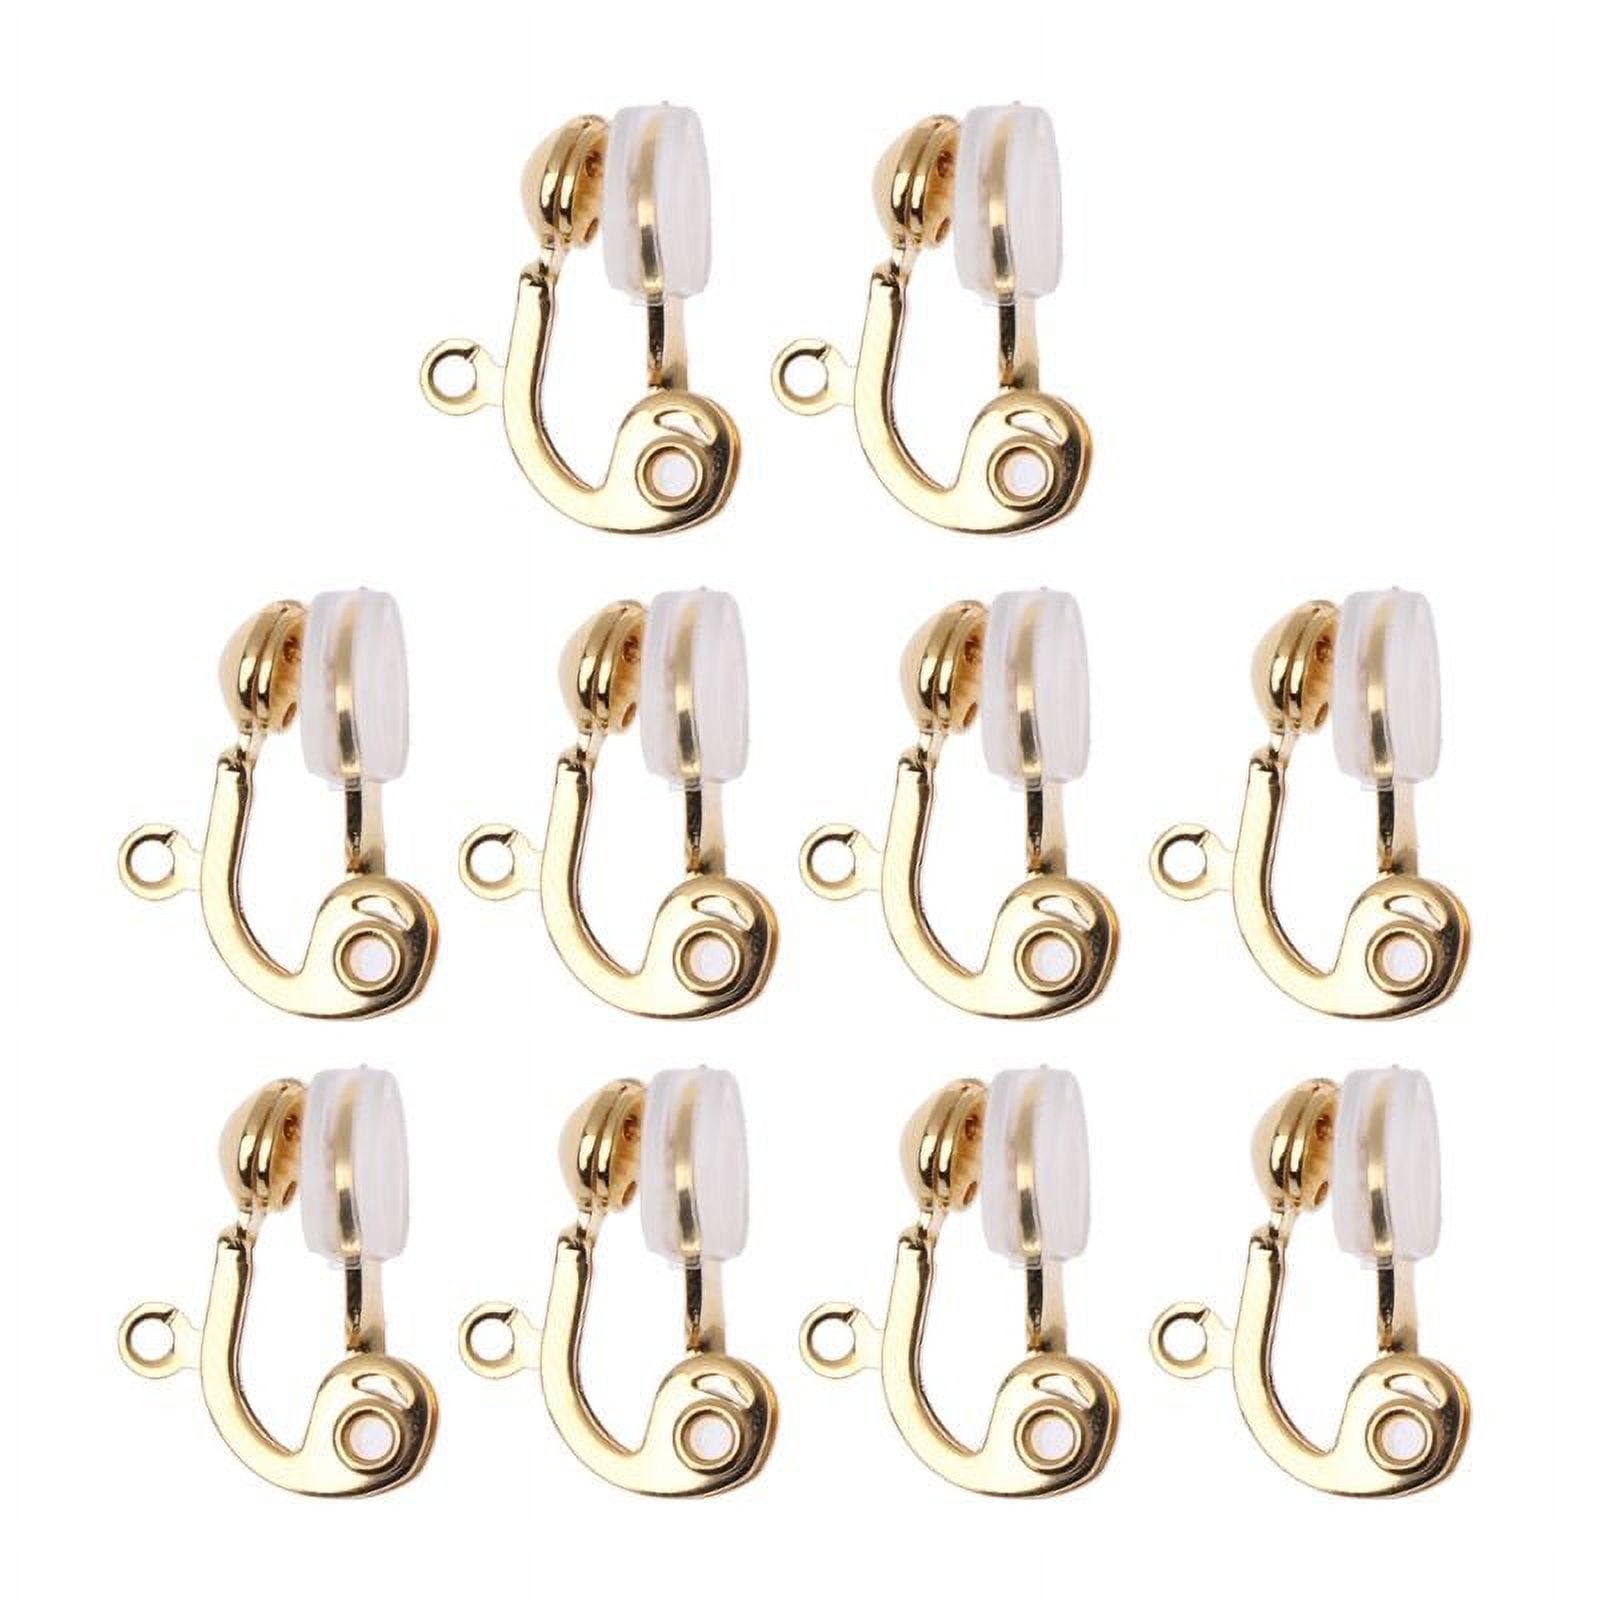 Hicarer 10 Pairs Non Pierced Earrings Clip-on Earrings Converter Components  with Post for Non-Pierced Ears, with 12 Pairs Comfort Earring Pads for